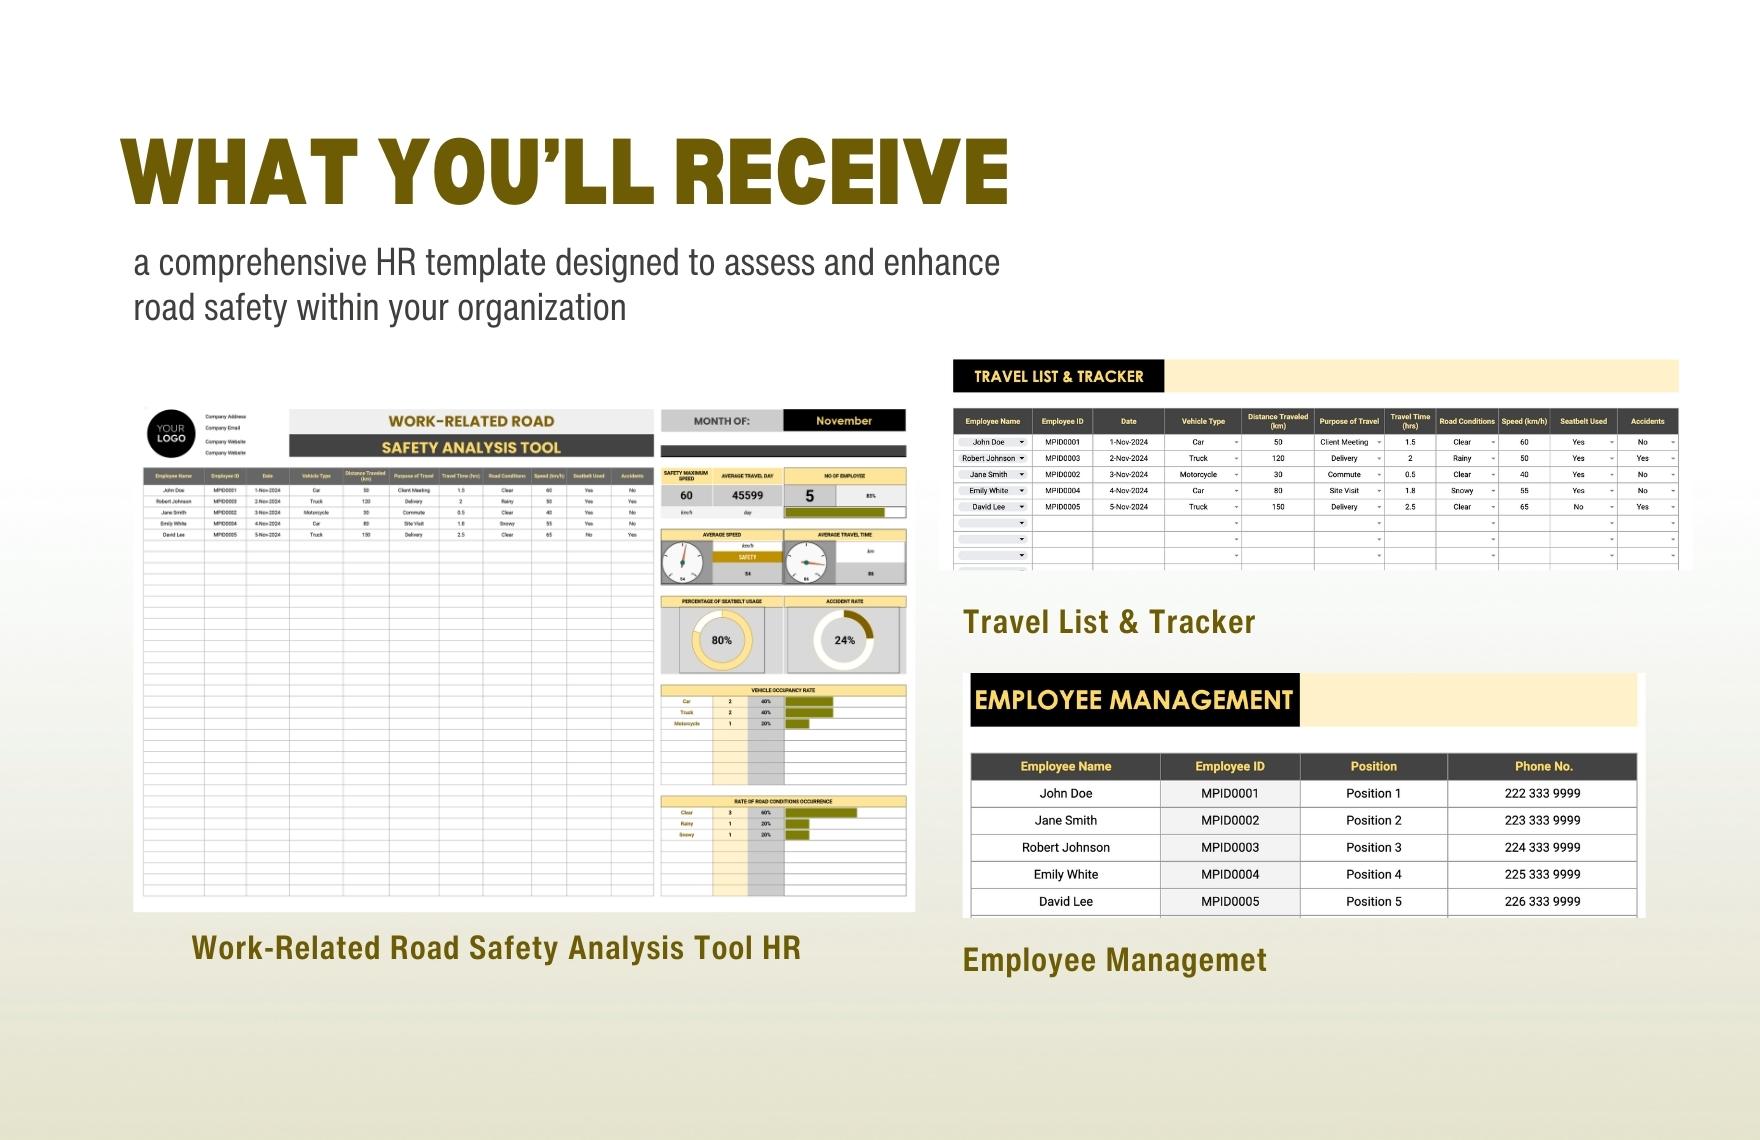 Work-Related Road Safety Analysis Tool HR Template